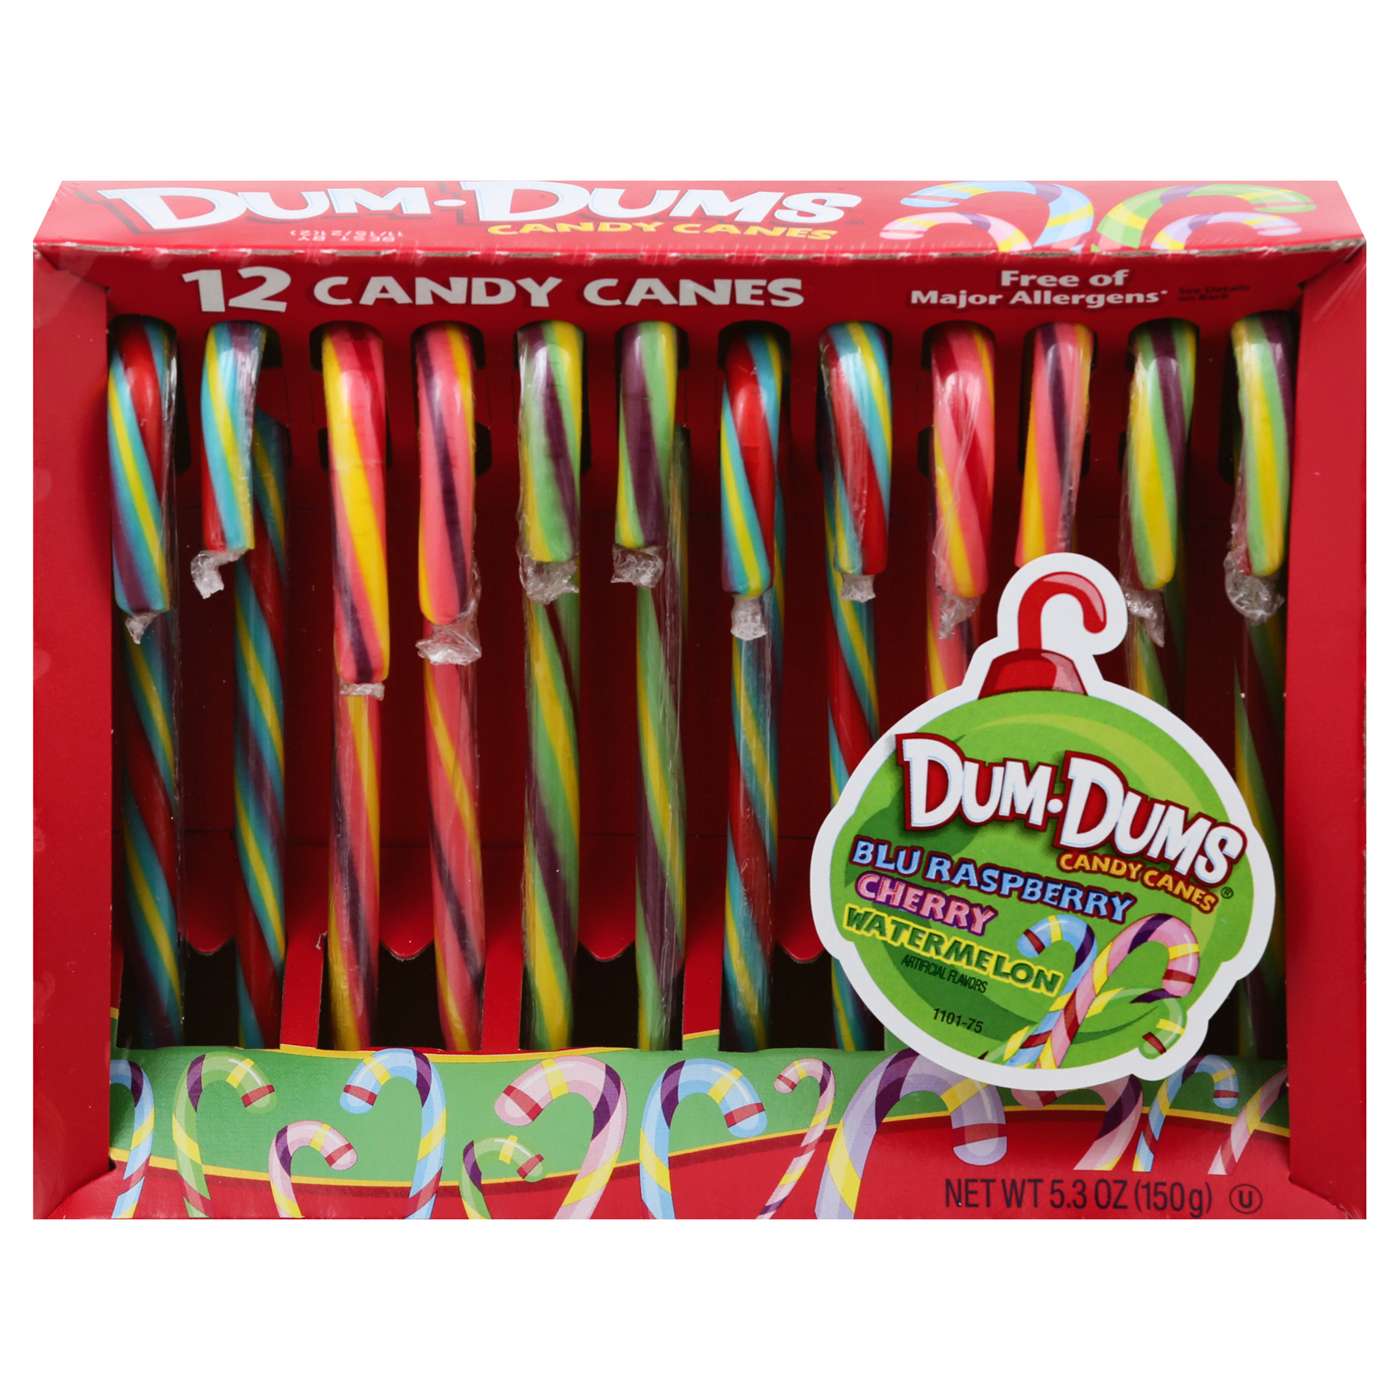 Dum Dums Assorted Flavor Candy Canes; image 1 of 2